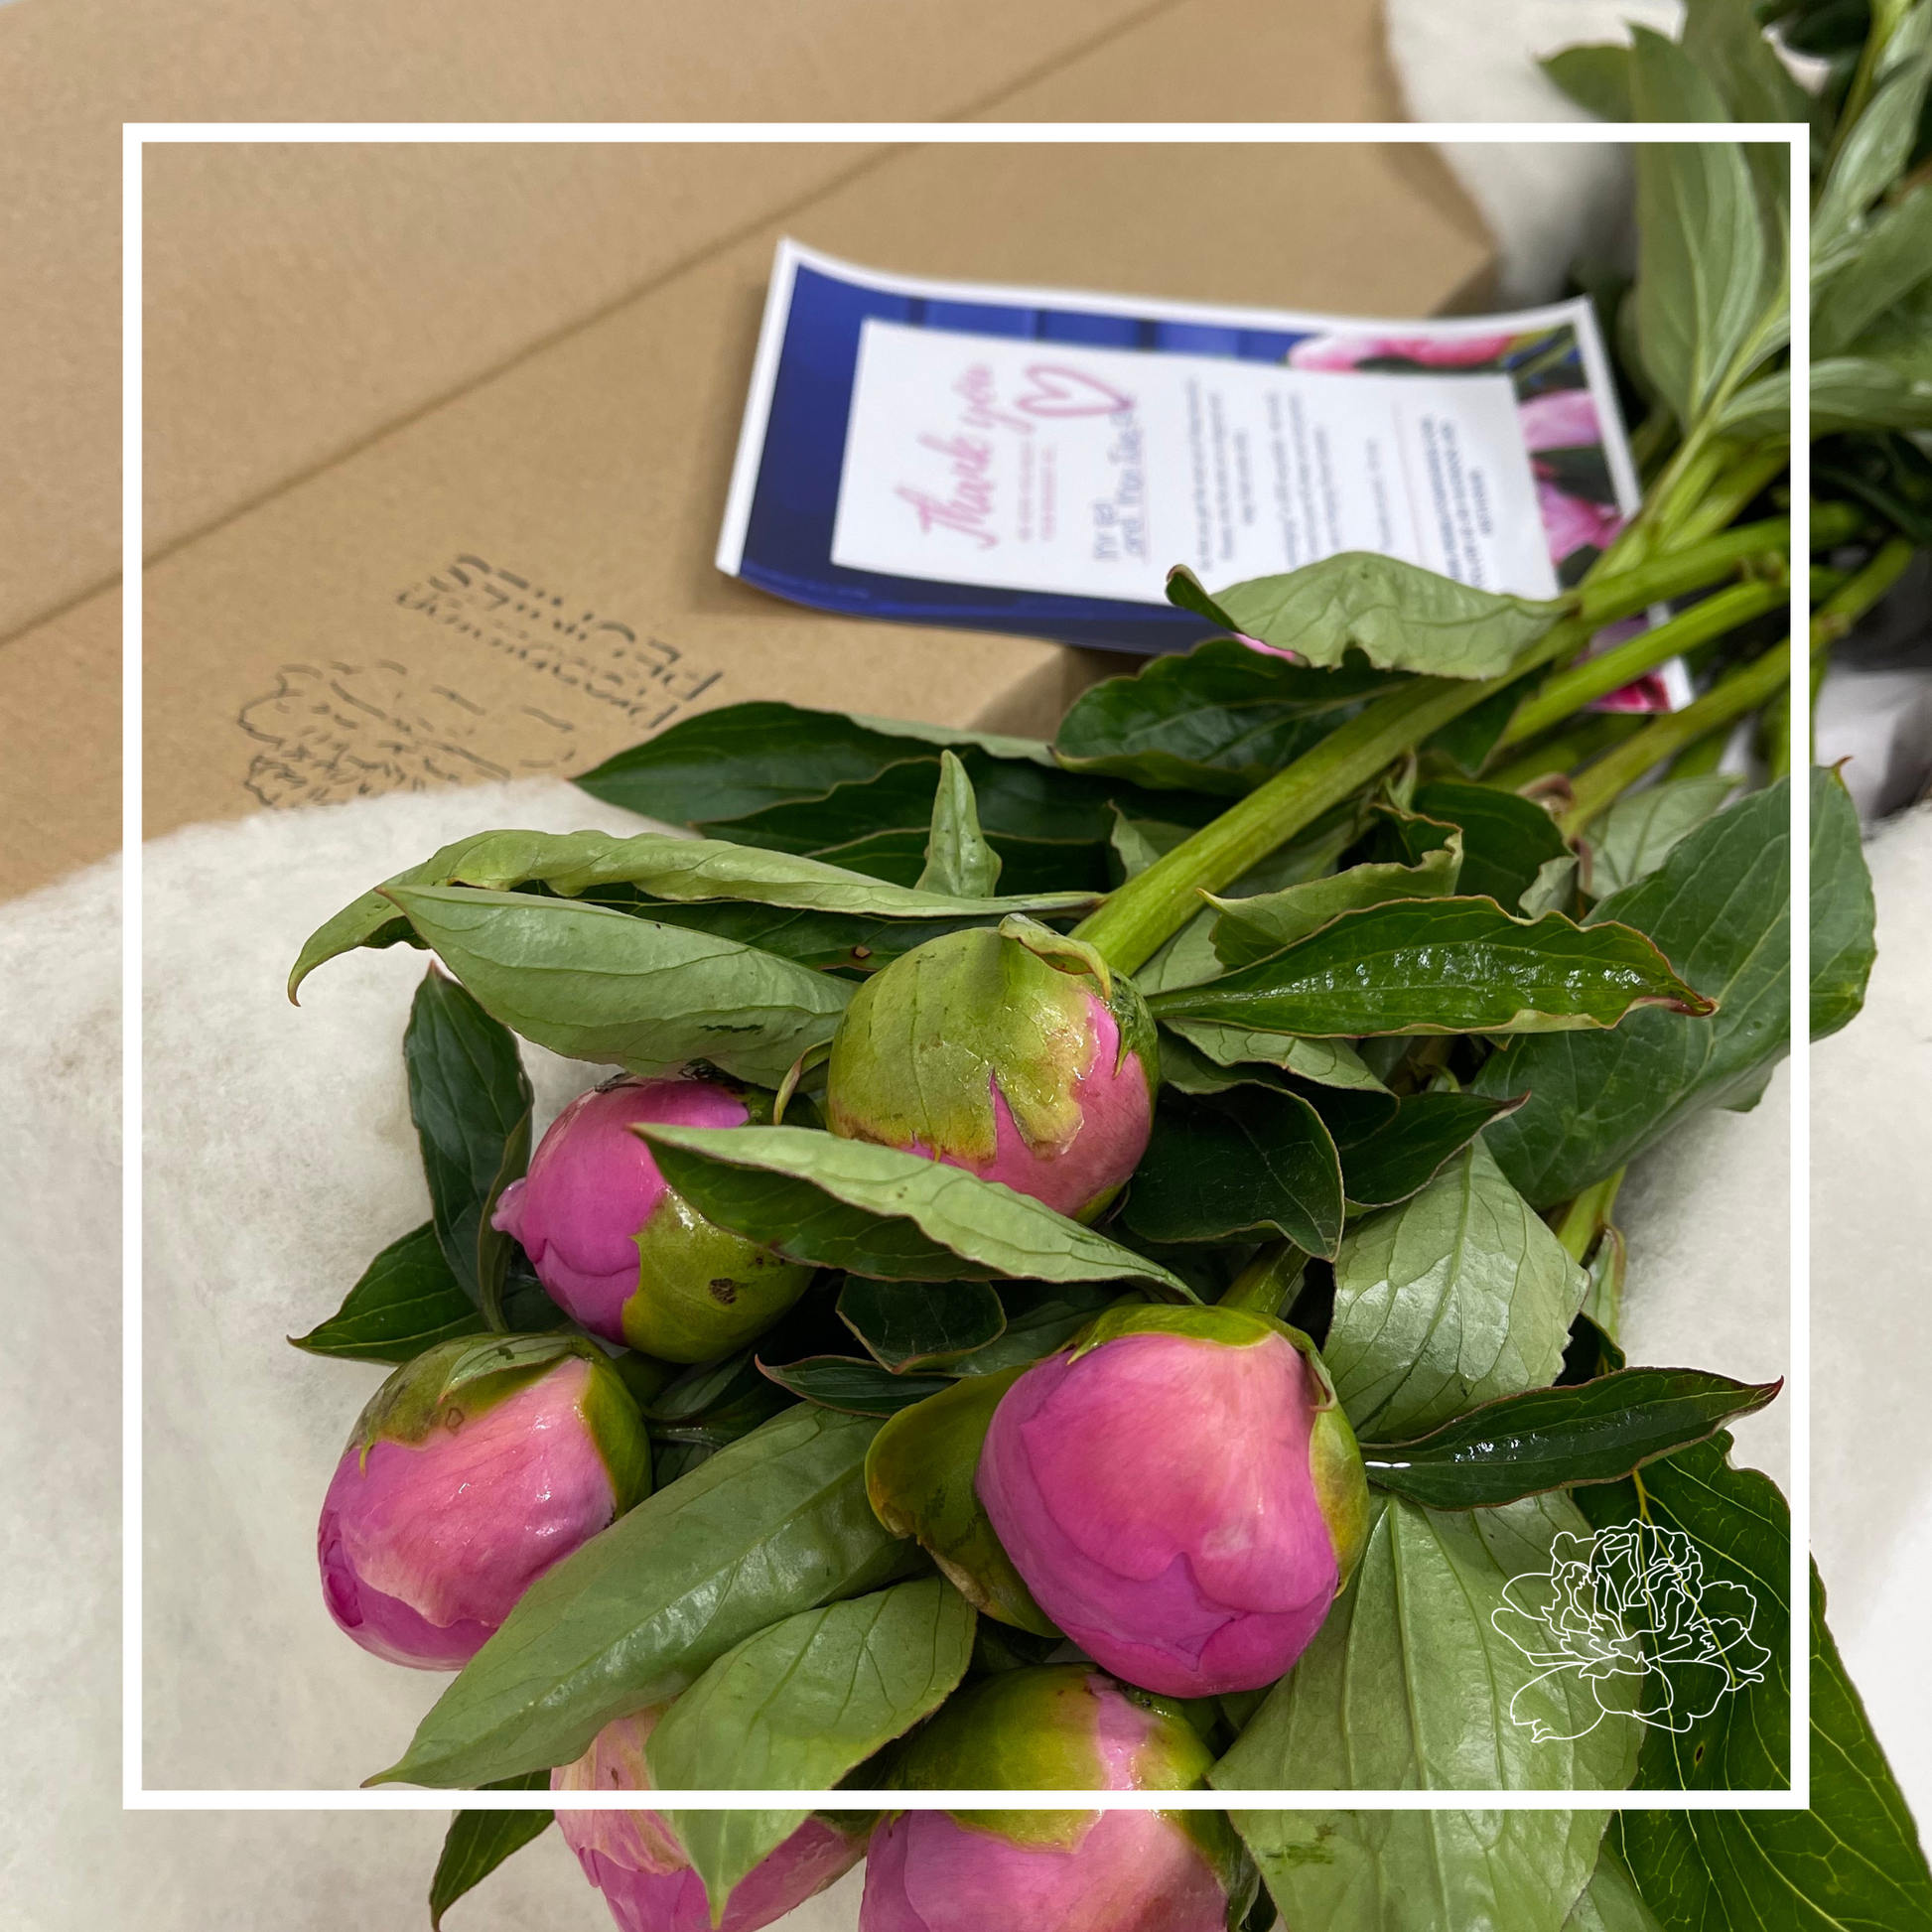 six peonies lying down on a bed of wool in a delivery box. An A4 flyer is placed on top with atten n ote to the custoemr. Framed in a white box graphic with the Prebbleton Peonies logo on the bottom right corner.